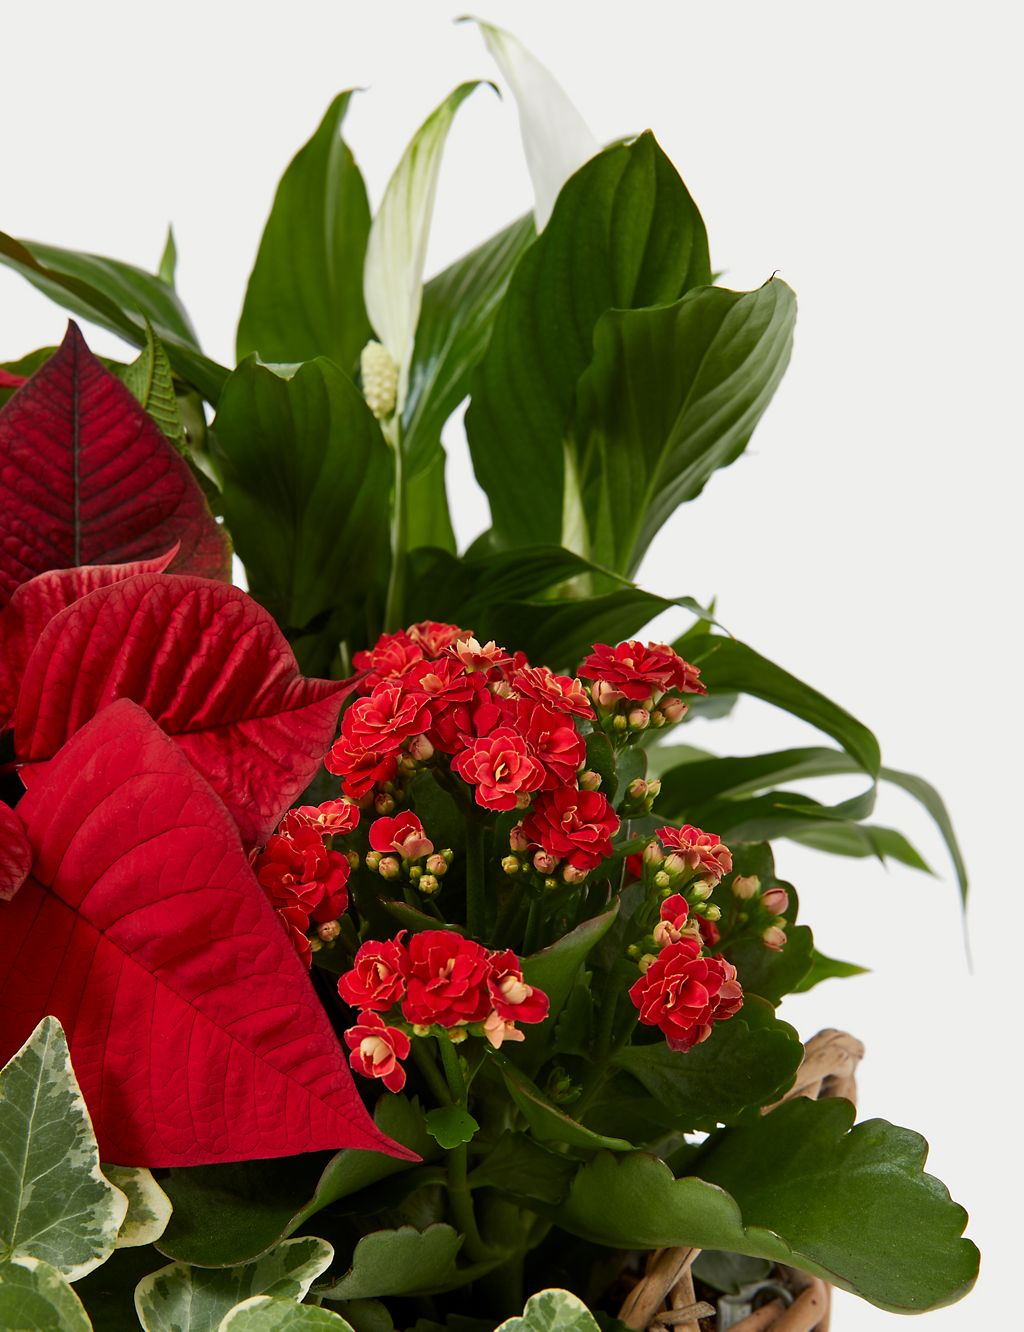 Festive Planted Basket with Poinsettia 2 of 4